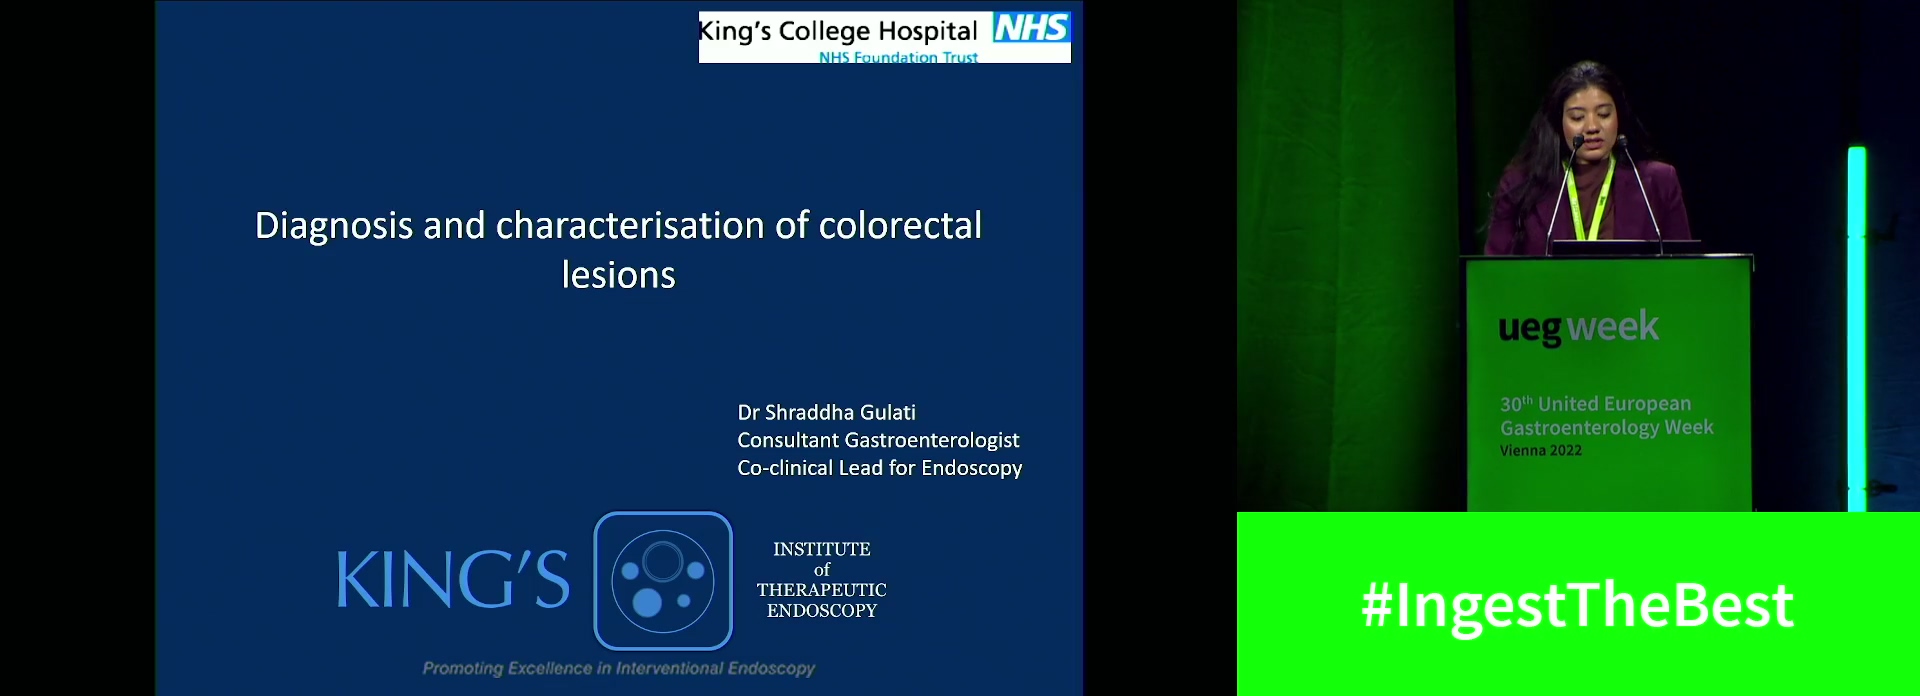 Diagnosis and characterisation of colorectal lesions